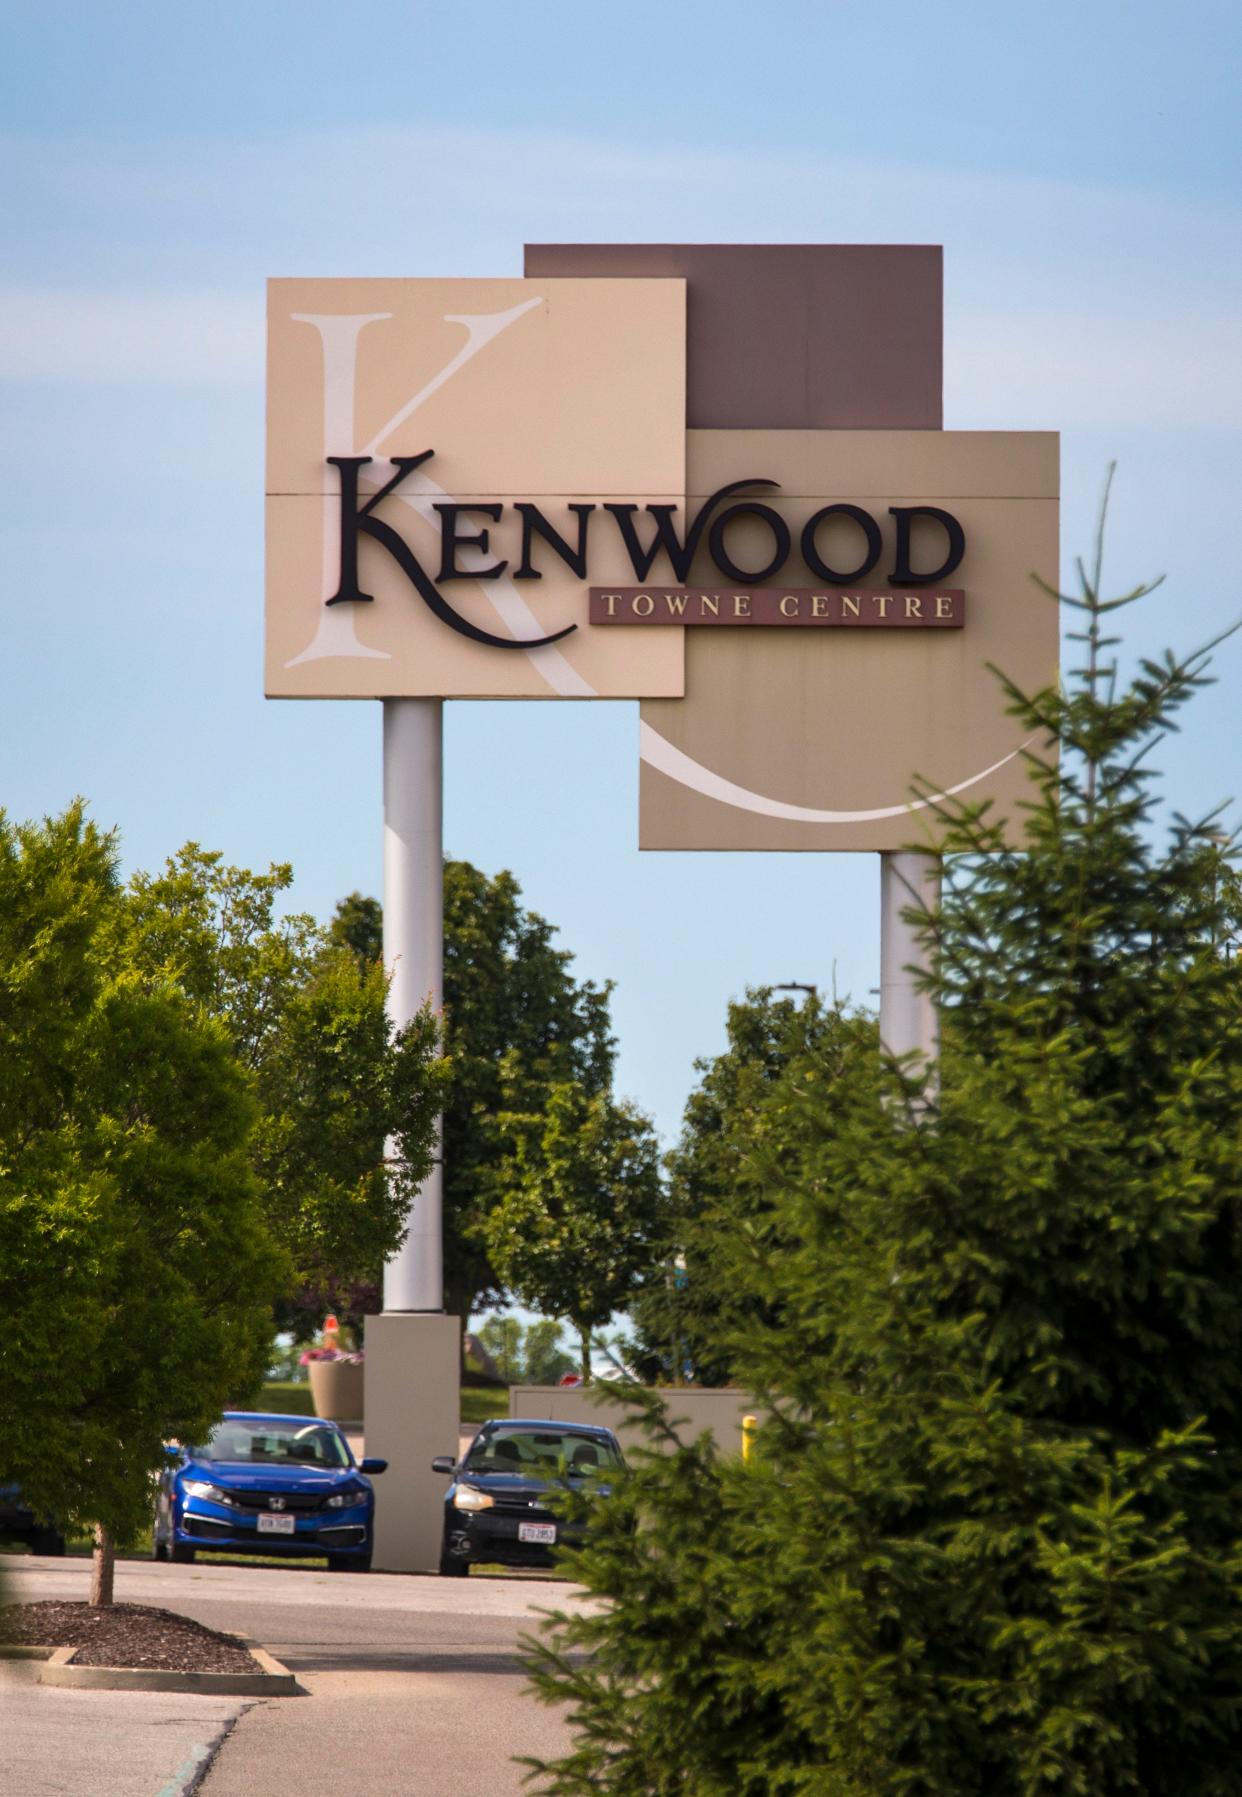 Those underage and unaccompanied after the curfew or without proper proof of age may be asked to leave, according to Kenwood Towne Centre's website.